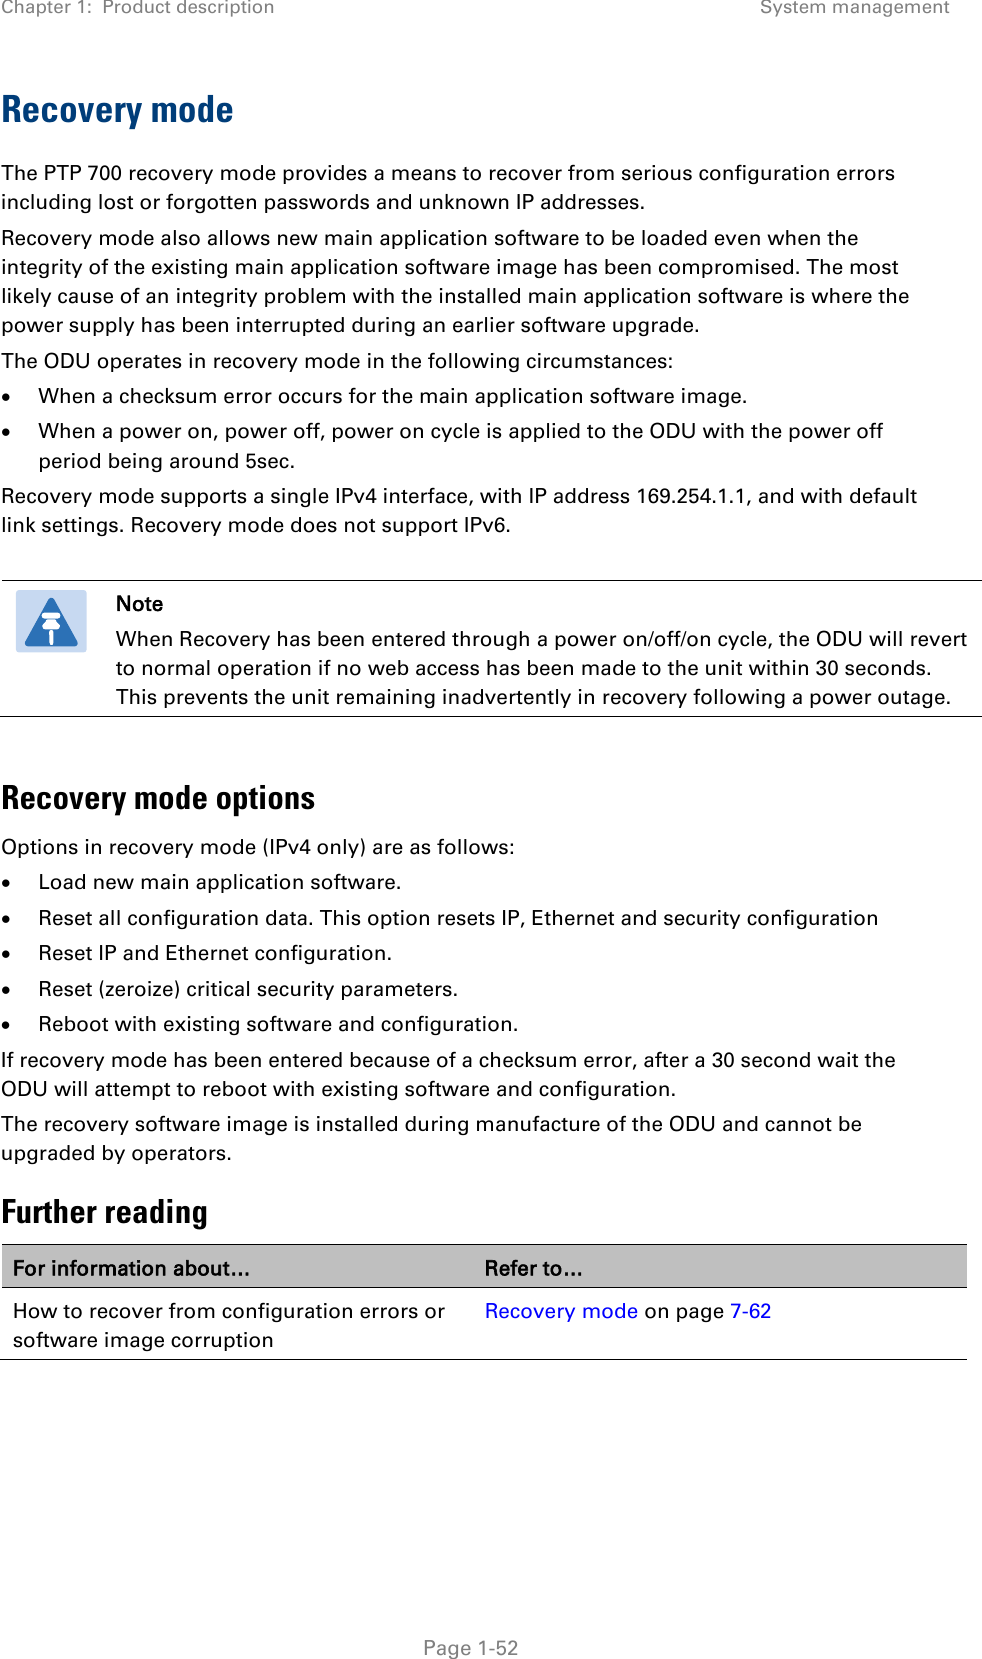 Chapter 1:  Product description System management  Recovery mode The PTP 700 recovery mode provides a means to recover from serious configuration errors including lost or forgotten passwords and unknown IP addresses. Recovery mode also allows new main application software to be loaded even when the integrity of the existing main application software image has been compromised. The most likely cause of an integrity problem with the installed main application software is where the power supply has been interrupted during an earlier software upgrade. The ODU operates in recovery mode in the following circumstances: • When a checksum error occurs for the main application software image. • When a power on, power off, power on cycle is applied to the ODU with the power off period being around 5sec. Recovery mode supports a single IPv4 interface, with IP address 169.254.1.1, and with default link settings. Recovery mode does not support IPv6.   Note When Recovery has been entered through a power on/off/on cycle, the ODU will revert to normal operation if no web access has been made to the unit within 30 seconds. This prevents the unit remaining inadvertently in recovery following a power outage.  Recovery mode options Options in recovery mode (IPv4 only) are as follows: • Load new main application software. • Reset all configuration data. This option resets IP, Ethernet and security configuration • Reset IP and Ethernet configuration. • Reset (zeroize) critical security parameters. • Reboot with existing software and configuration. If recovery mode has been entered because of a checksum error, after a 30 second wait the ODU will attempt to reboot with existing software and configuration. The recovery software image is installed during manufacture of the ODU and cannot be upgraded by operators. Further reading For information about… Refer to… How to recover from configuration errors or software image corruption Recovery mode on page 7-62   Page 1-52 